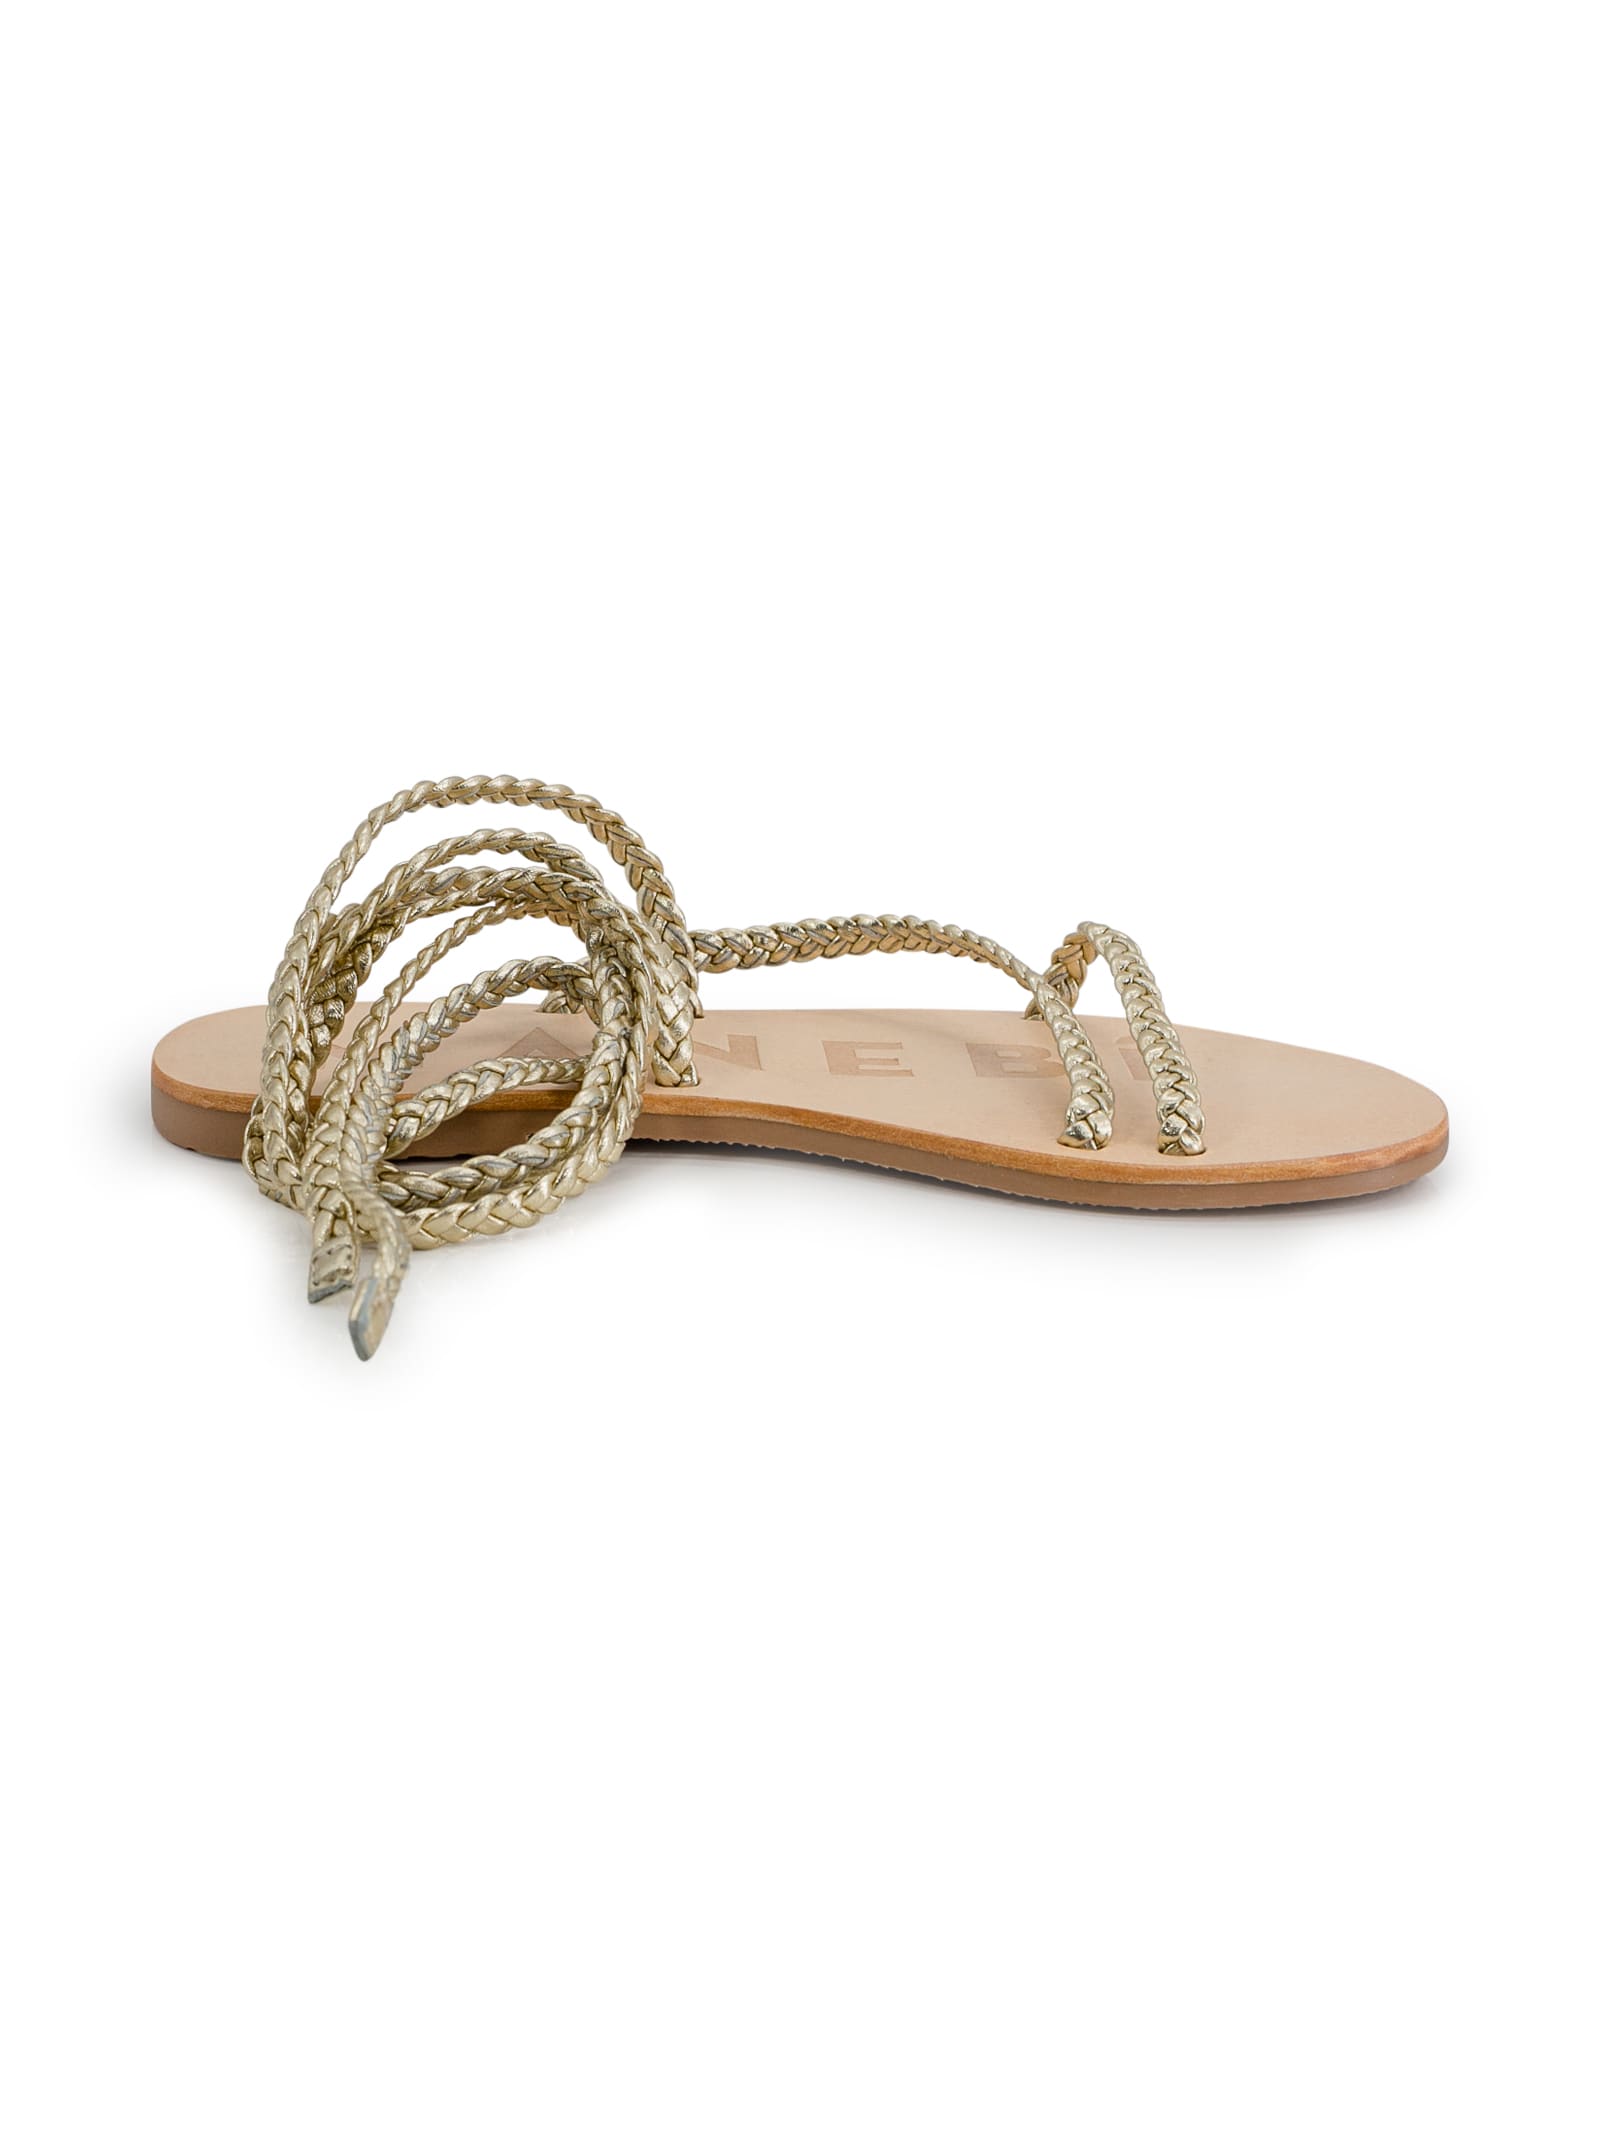 Leather Sandals Tie-up Multi Braid Bands Canyon